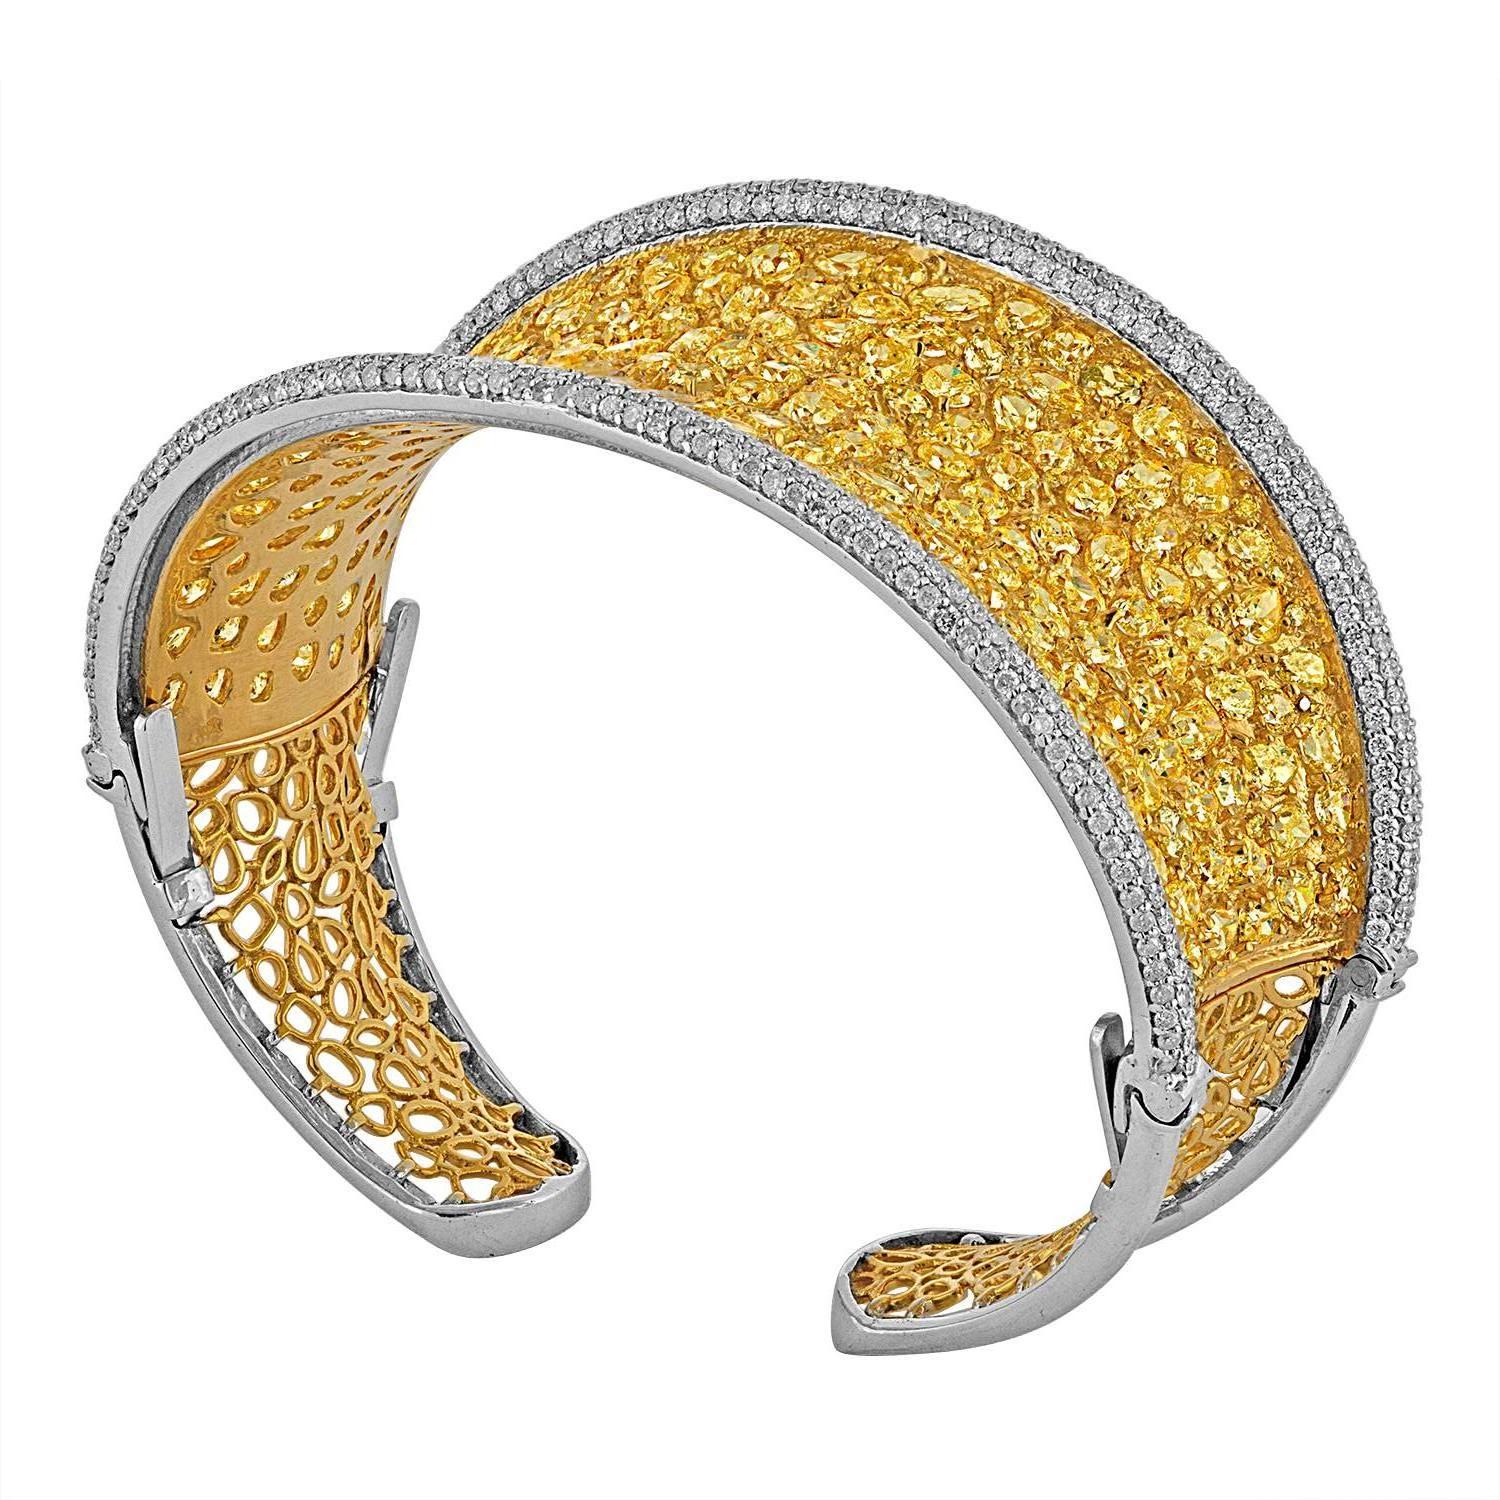 Fancy Shaped Yellow and White Diamonds set in Two Color Gold Bangle Bracelet